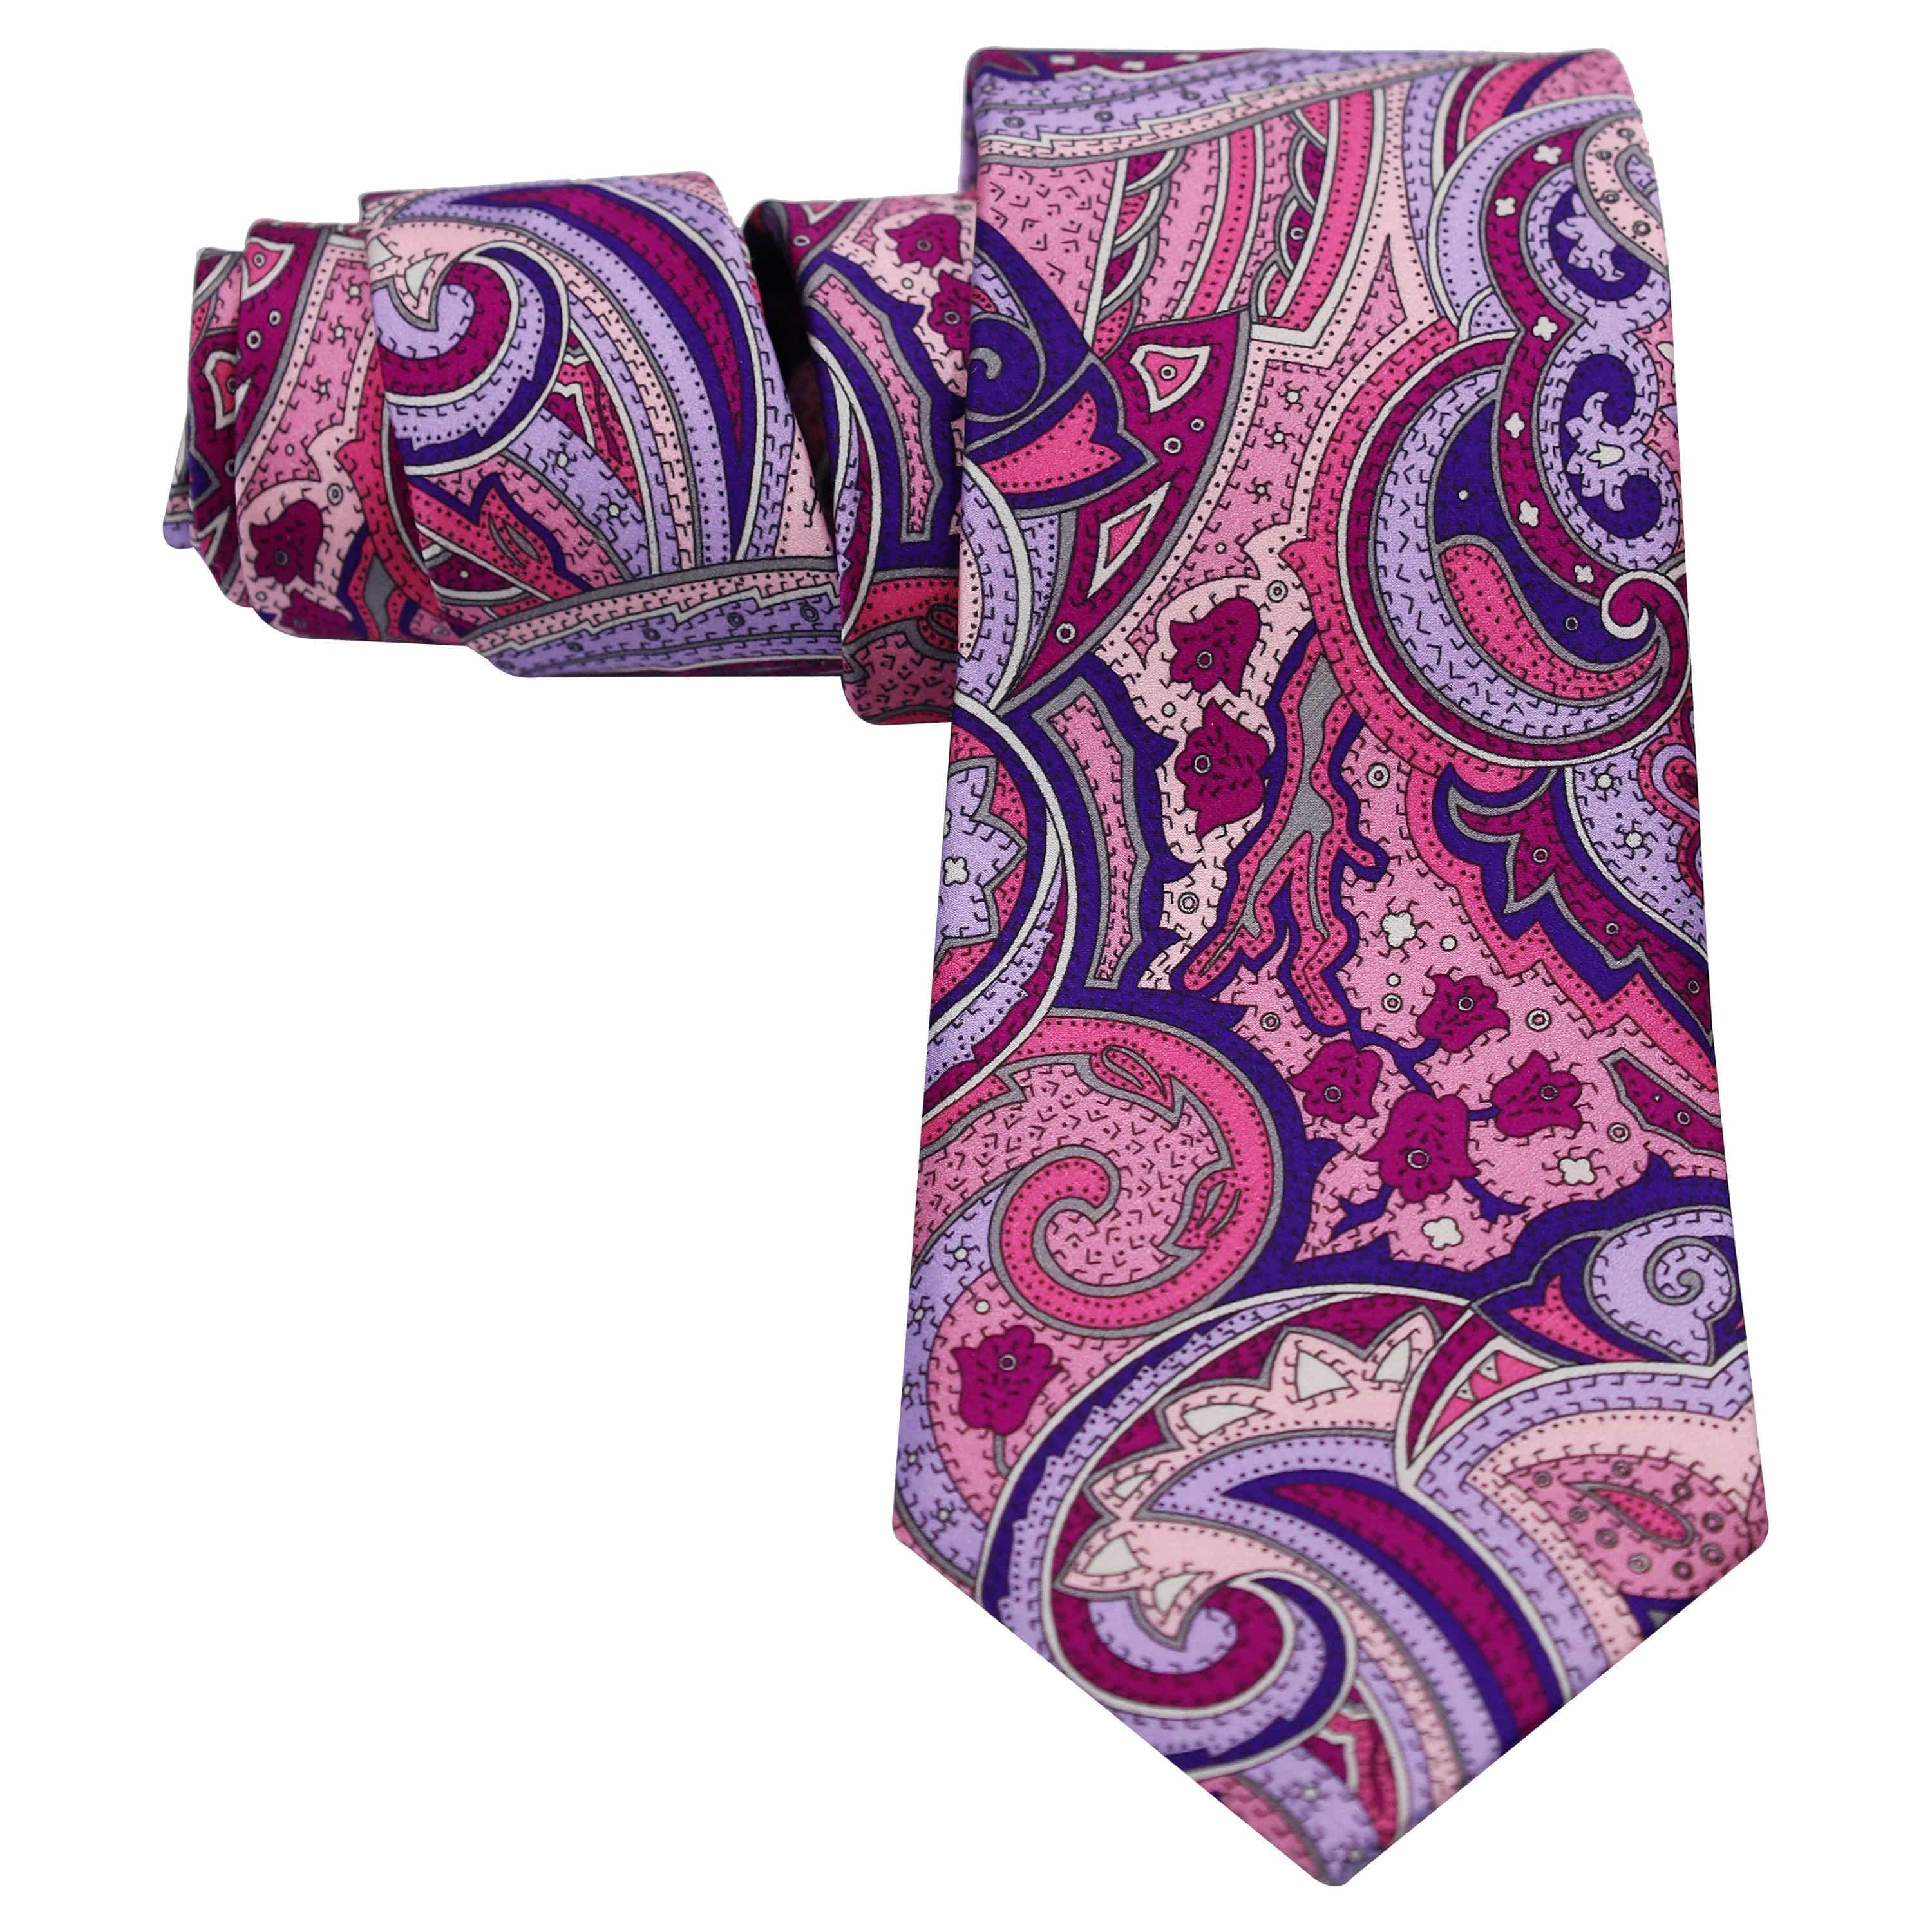 PURPLE PINK AND MAUVE PAISLEY SILK TIE - Just White Shirts